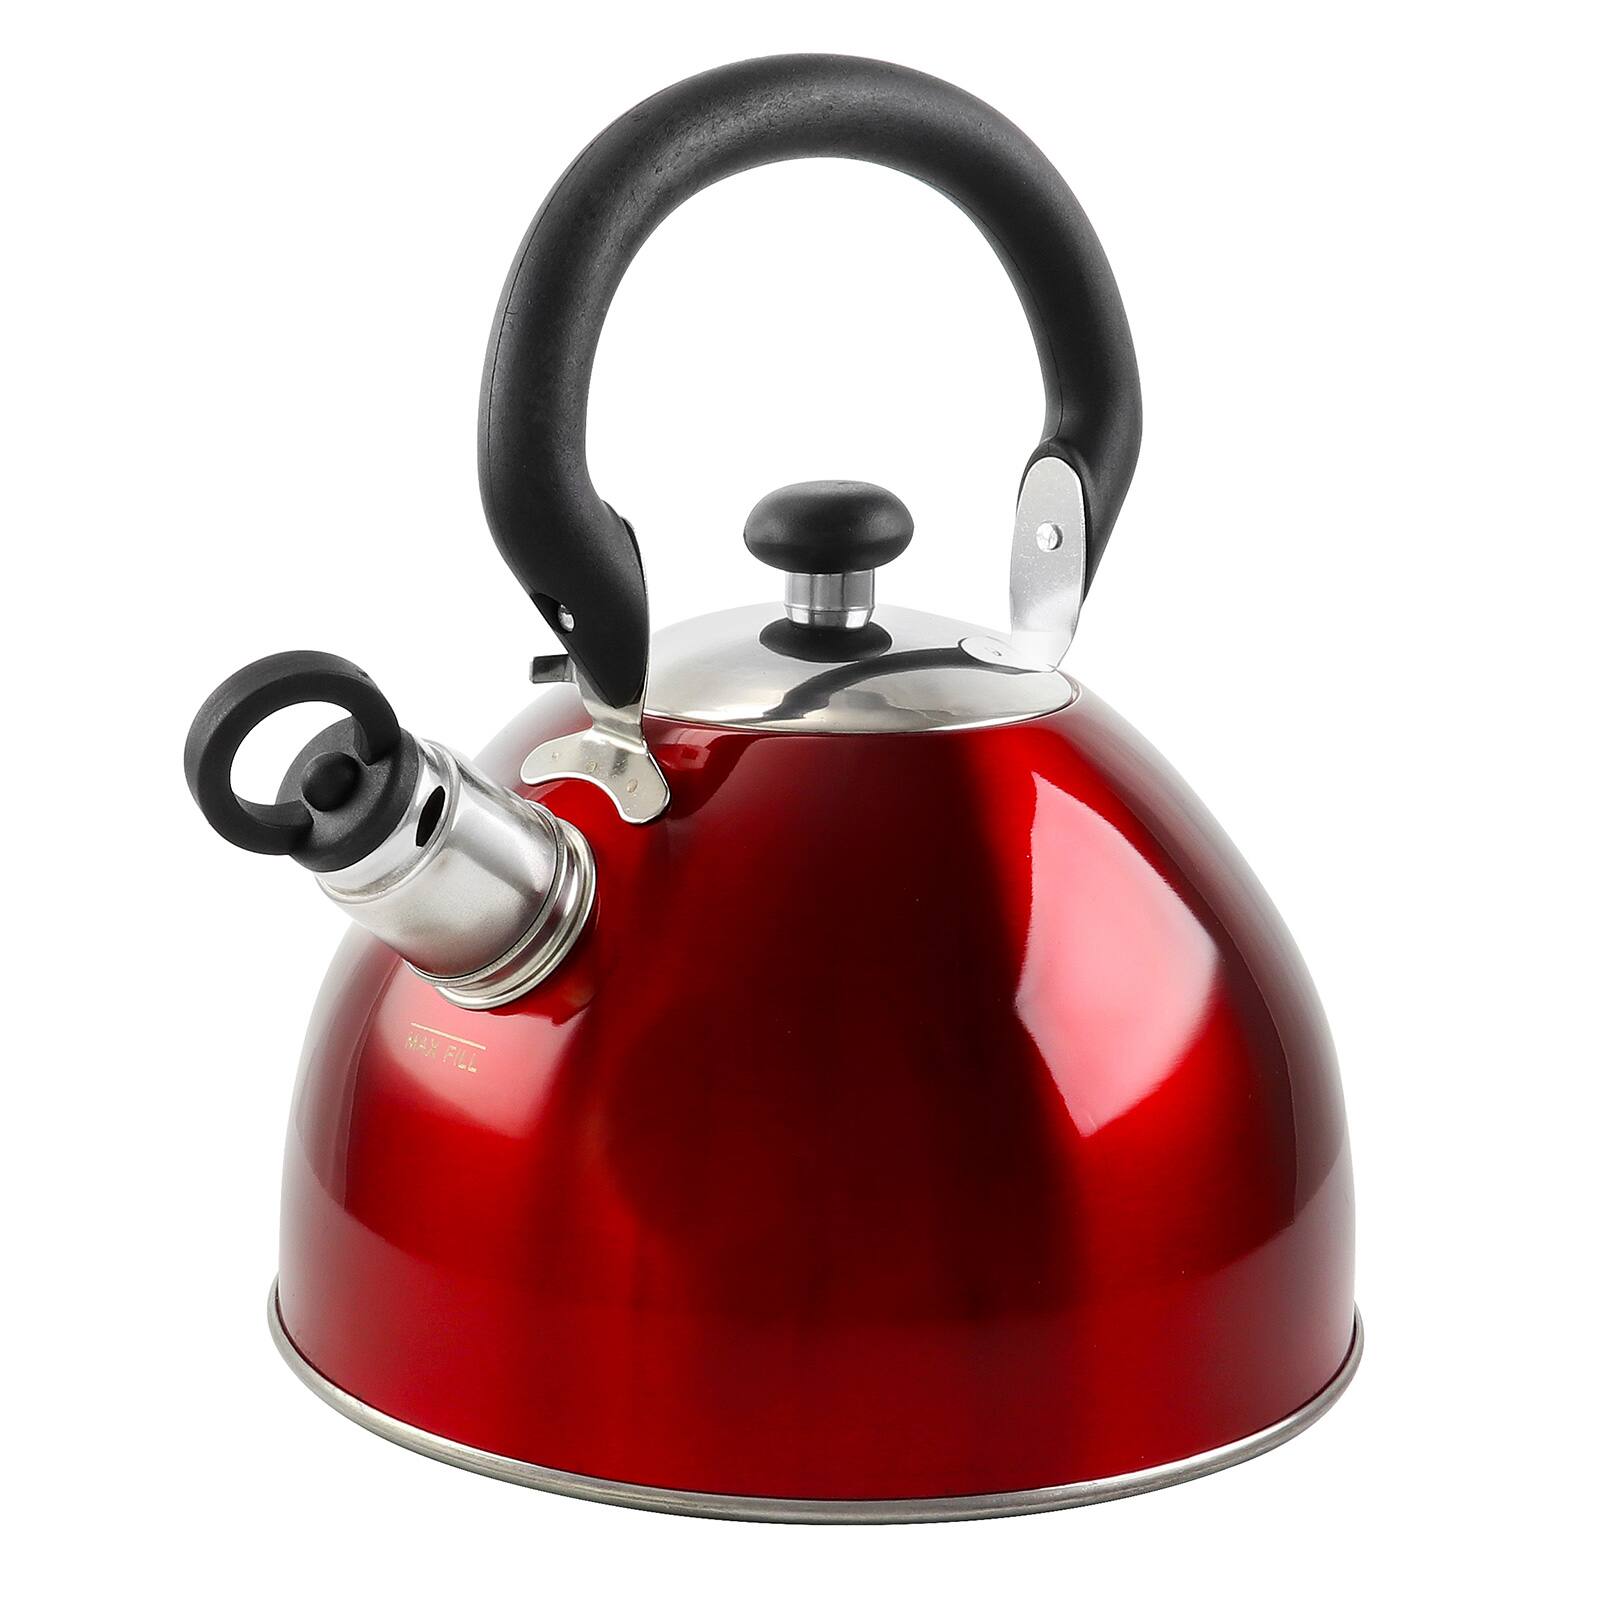 Clear Glass Whistling Tea Kettle, to Purely Brew Tea With No Metallic Taste  or Other Carafe Flavors, 12 Cup Capacity